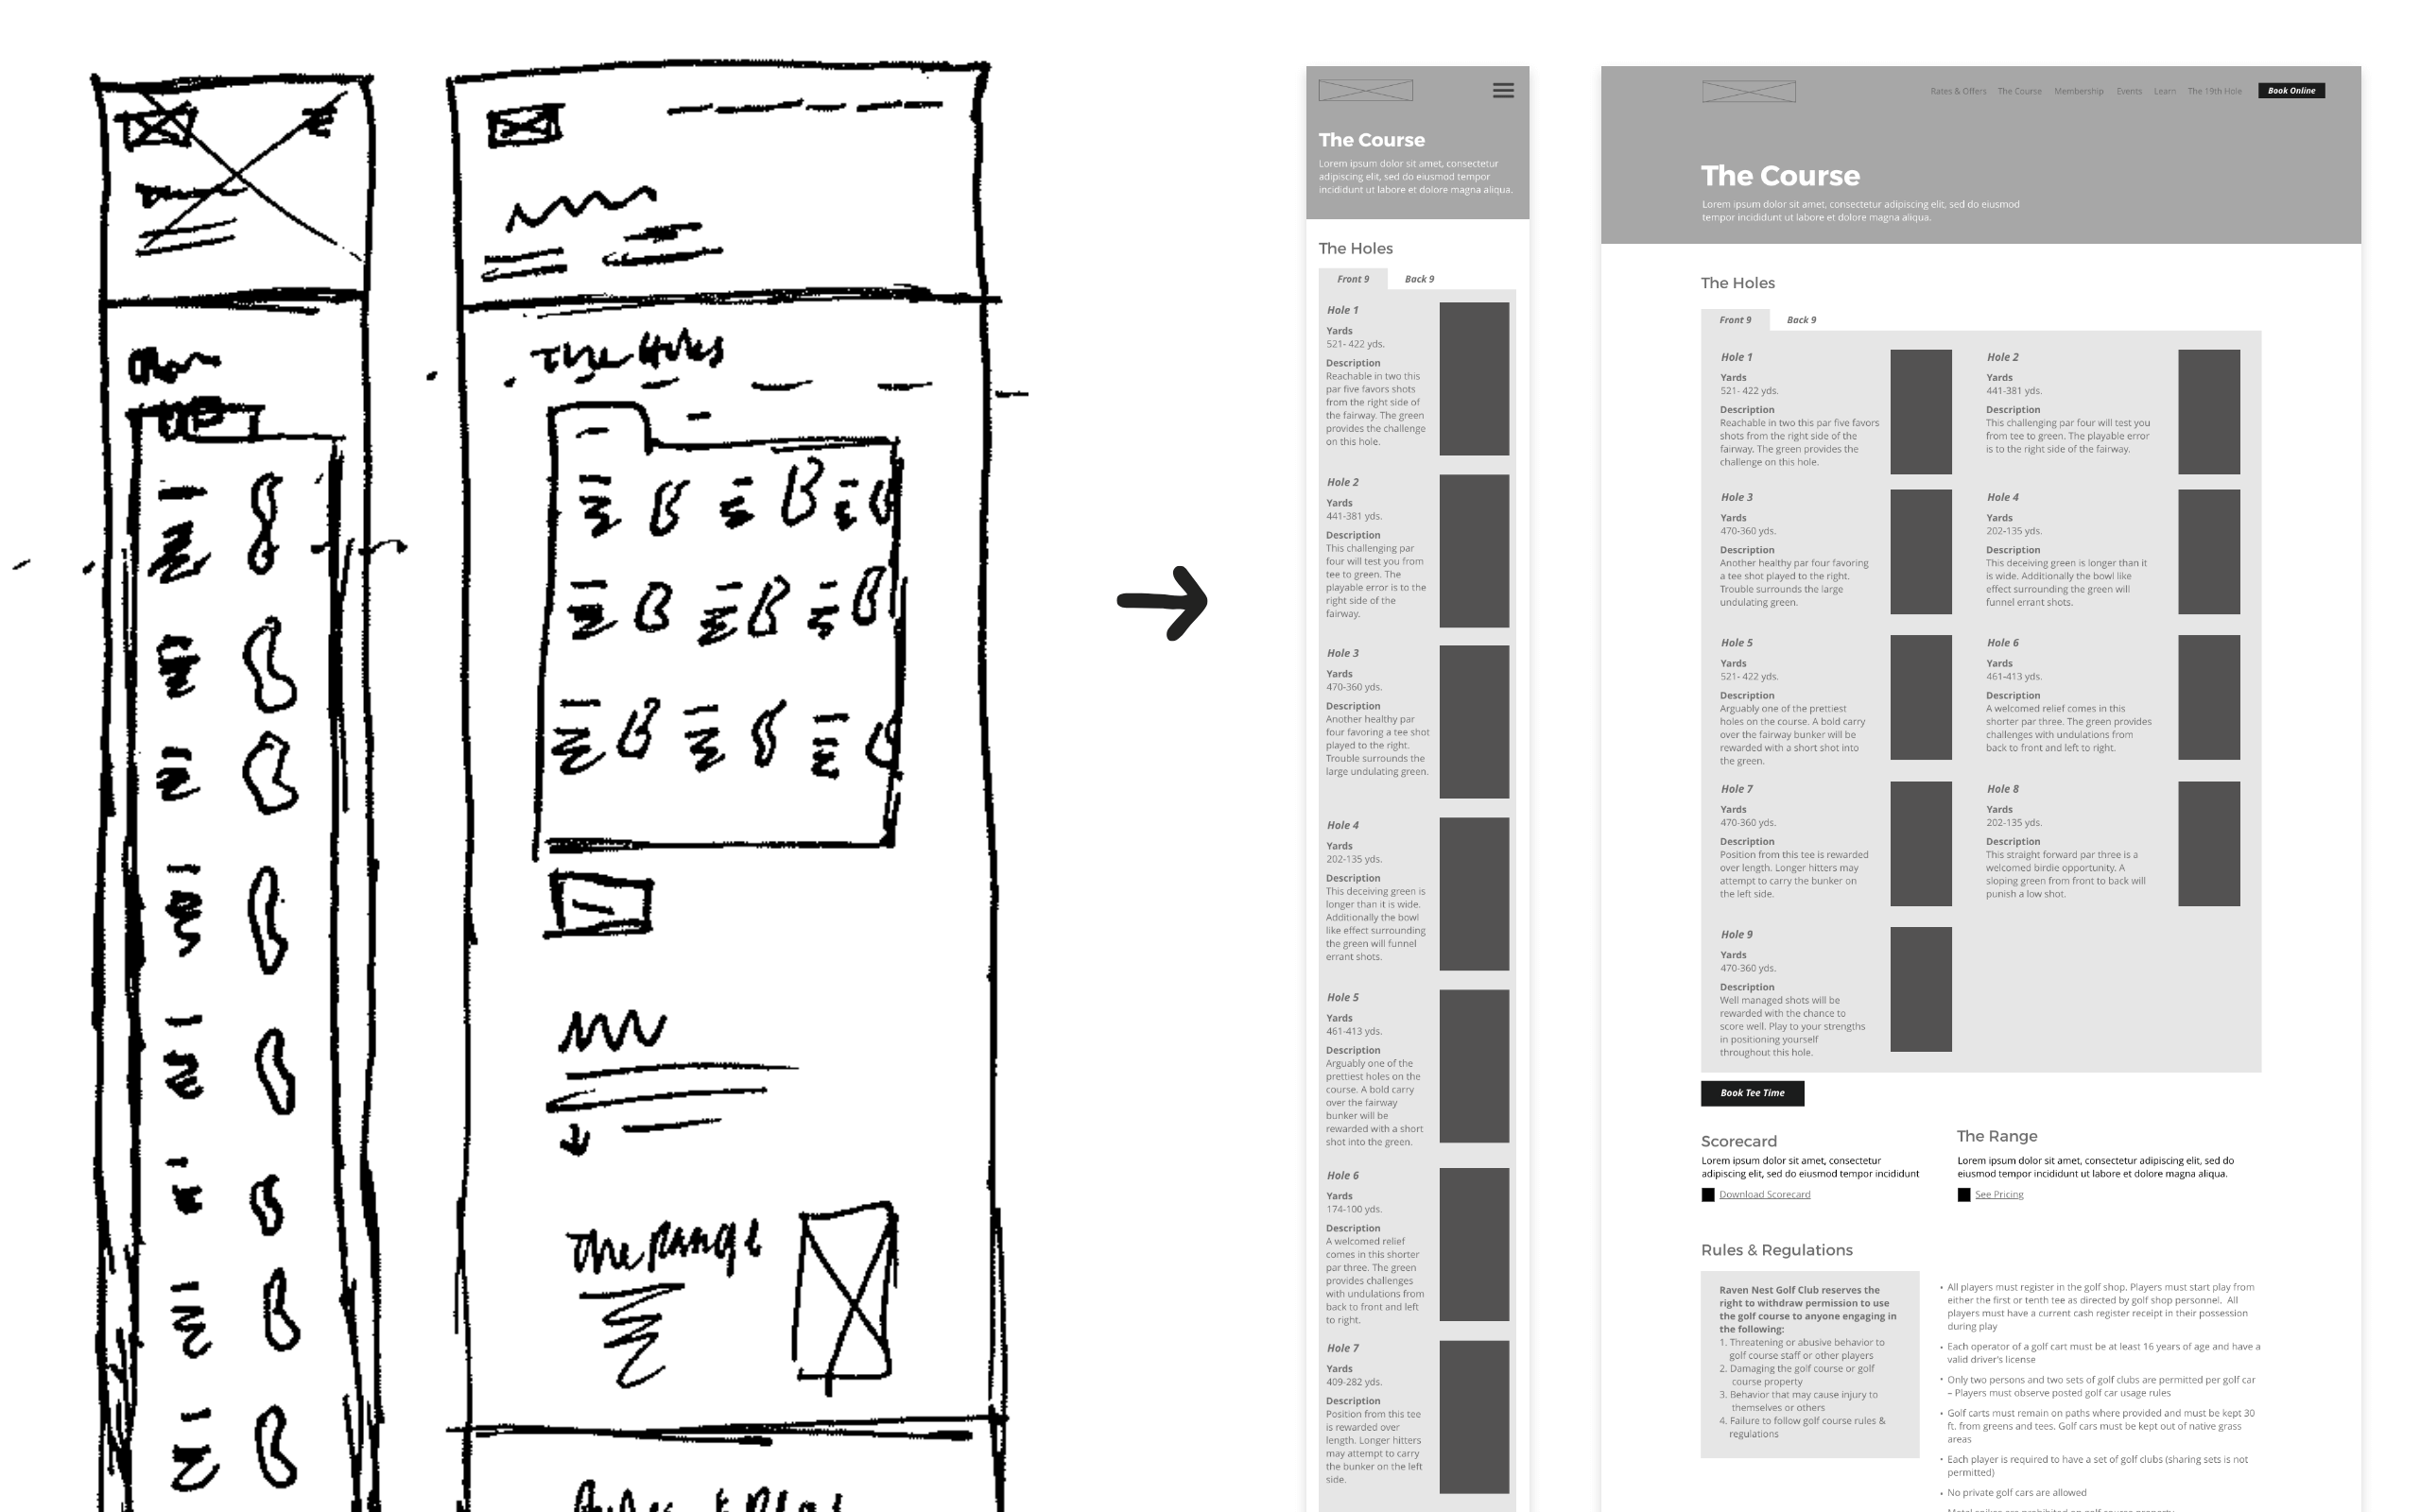 Rough sketches of course web page with arrow pointing to wireframe rendering